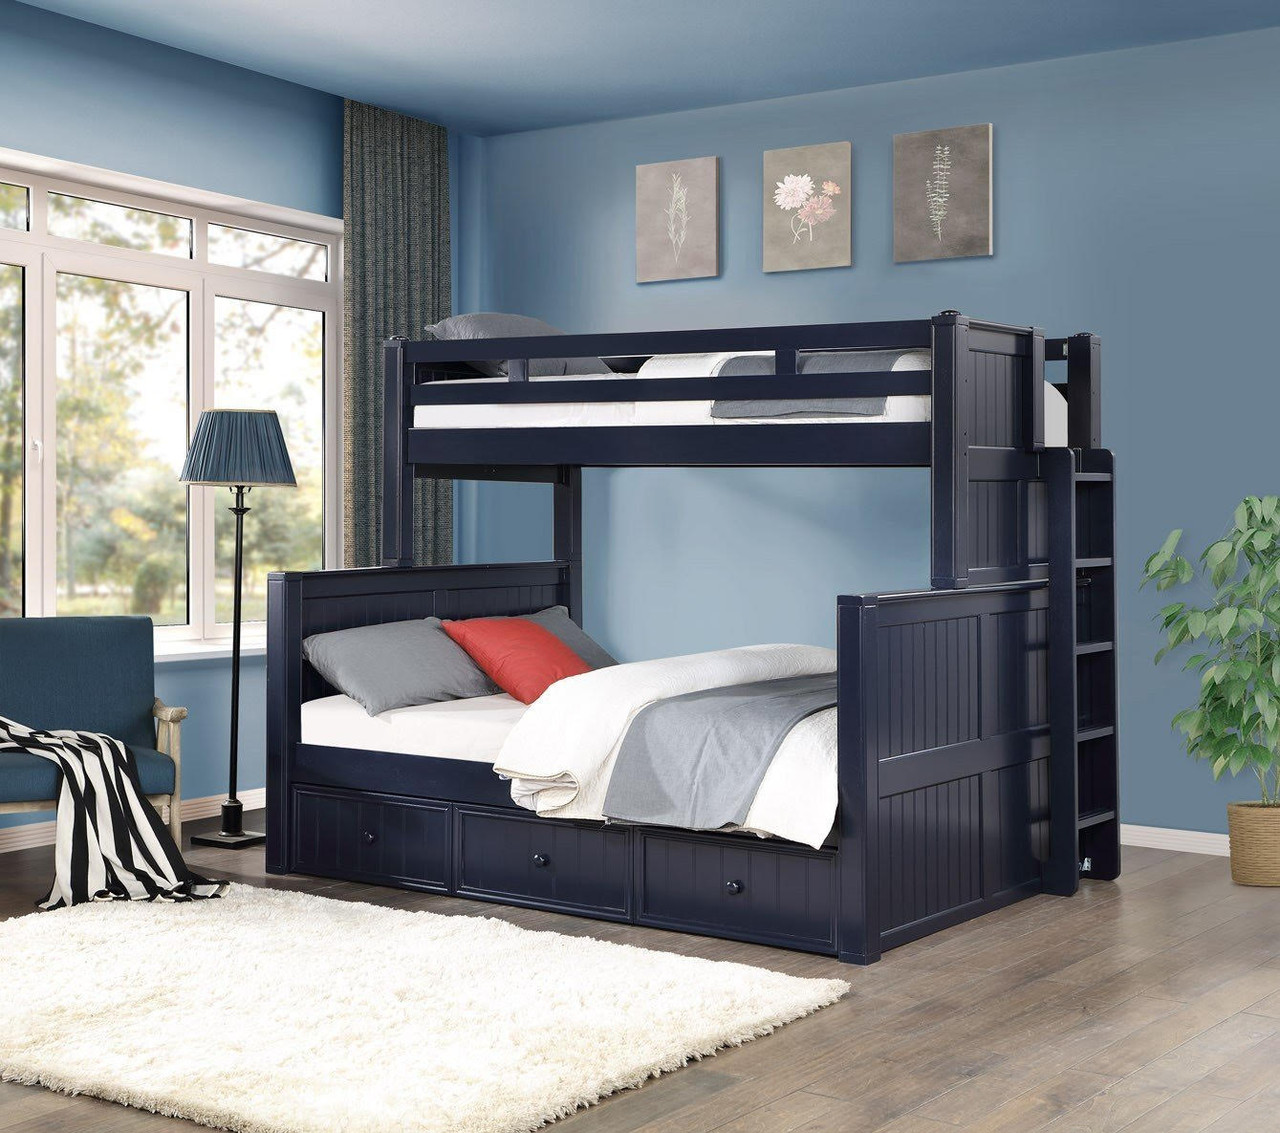 Twin XL over Queen Bunk Bed with Trundle Bed